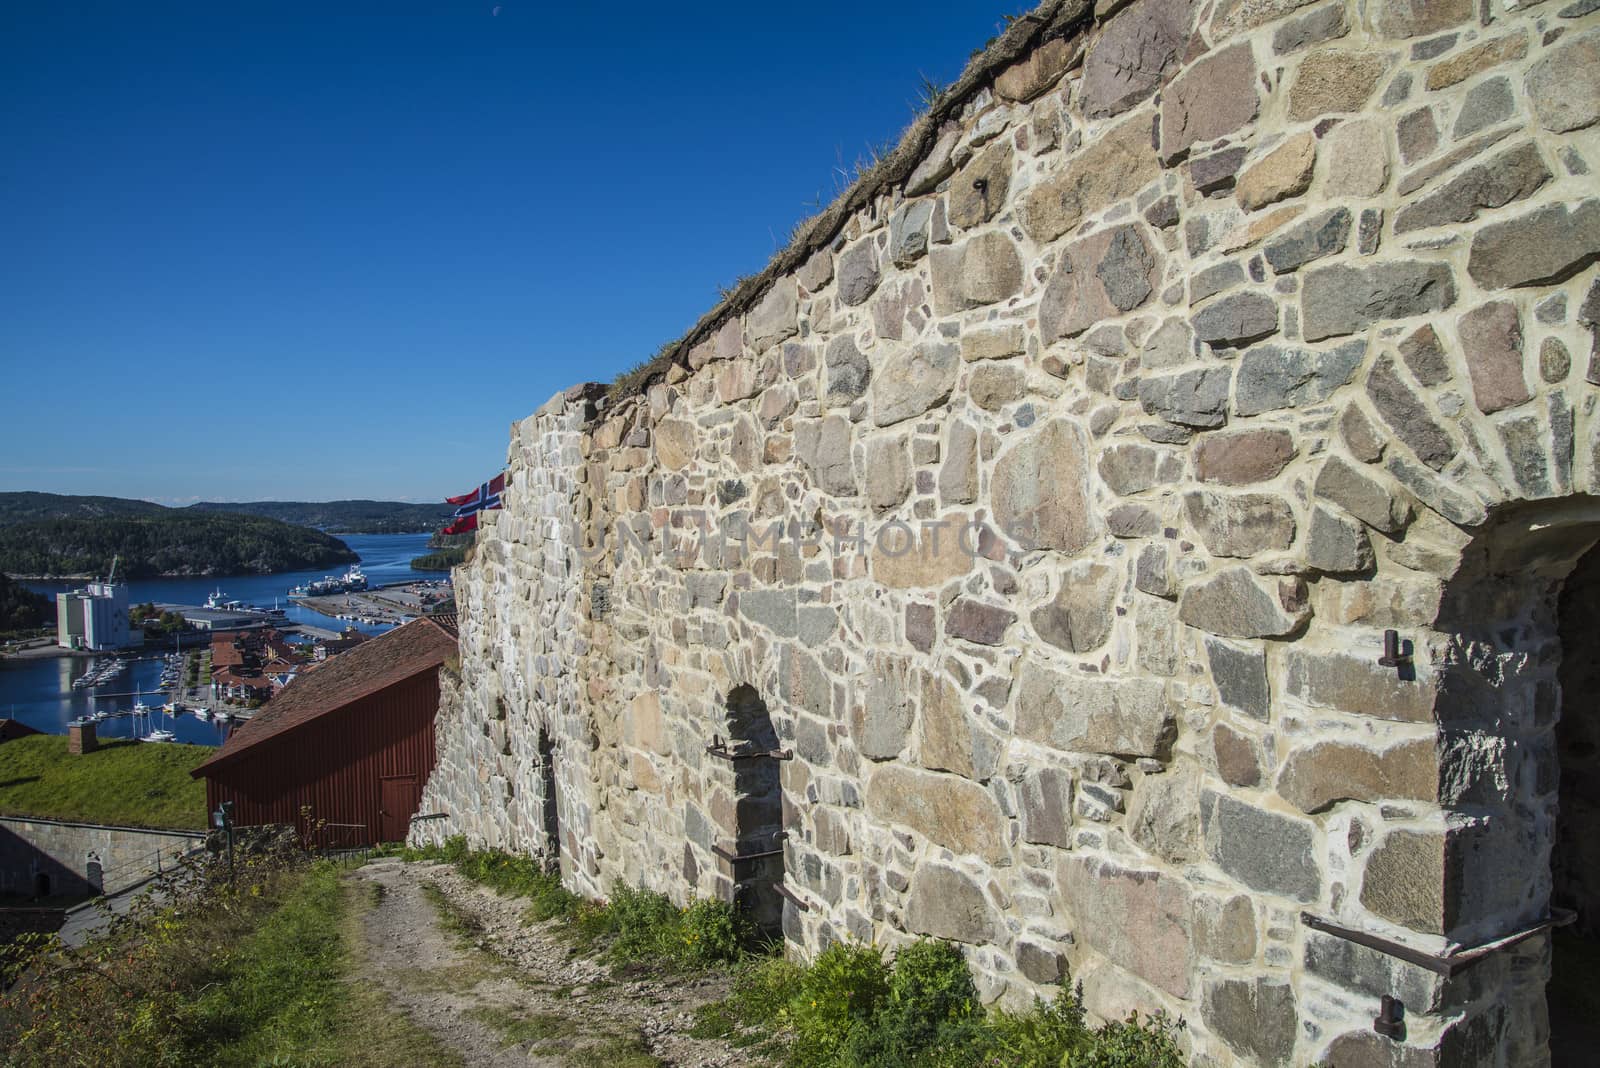 The image is shot in September 2013 at Fredriksten Fortress in Halden, Noway and shows the Large powderhouses and Northern curtain wall that protects the Citadel to the west and connects Queen's bastion with Prince Chritians bastion, the curtain wall was completed in 1668